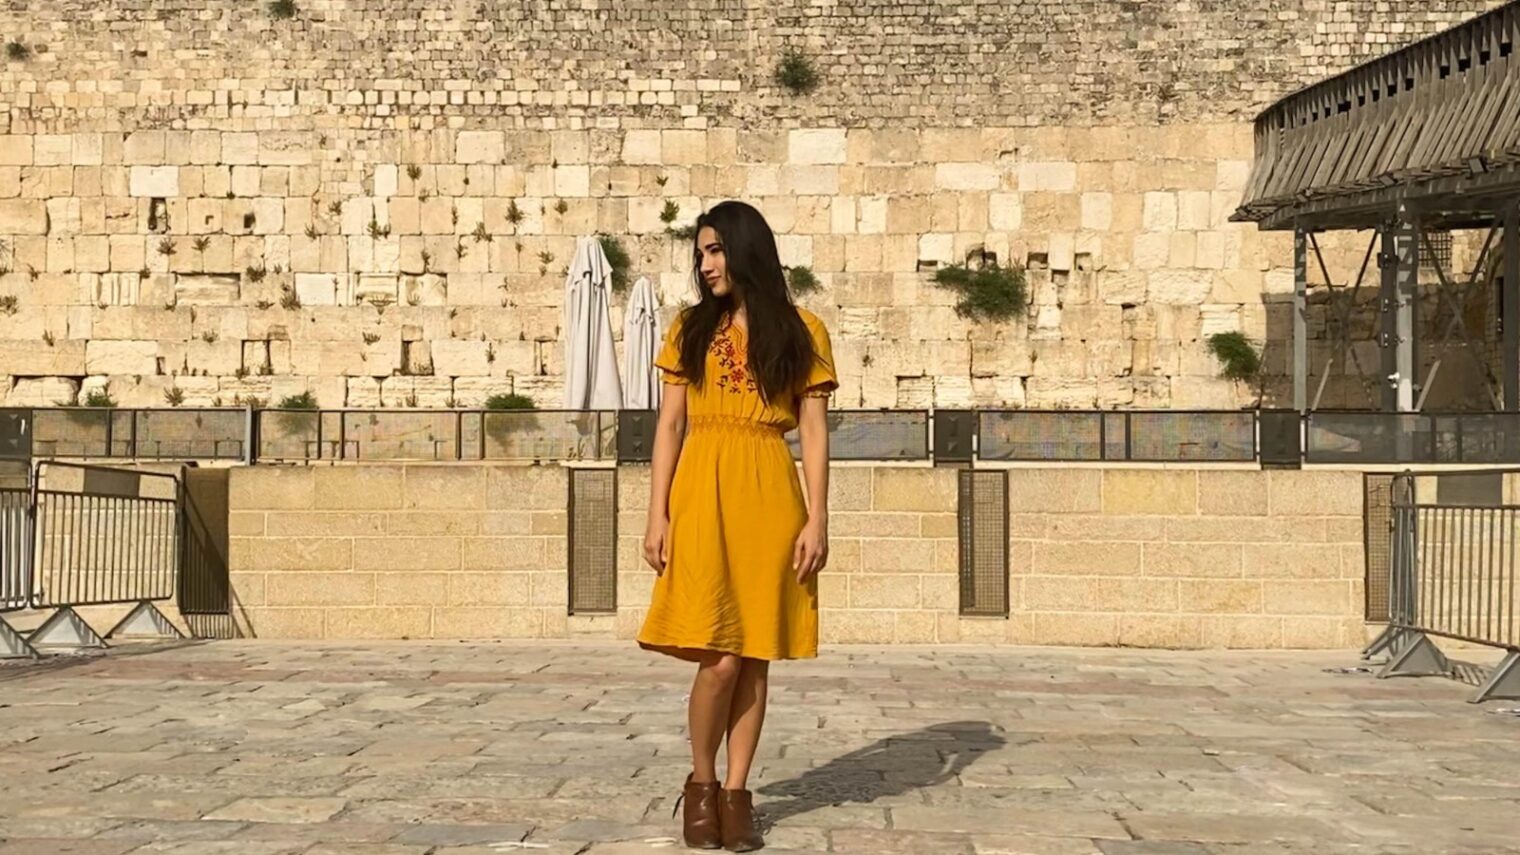 India Persaud at Jerusalem’ Western Wall. Photo by Thamiris Theigher